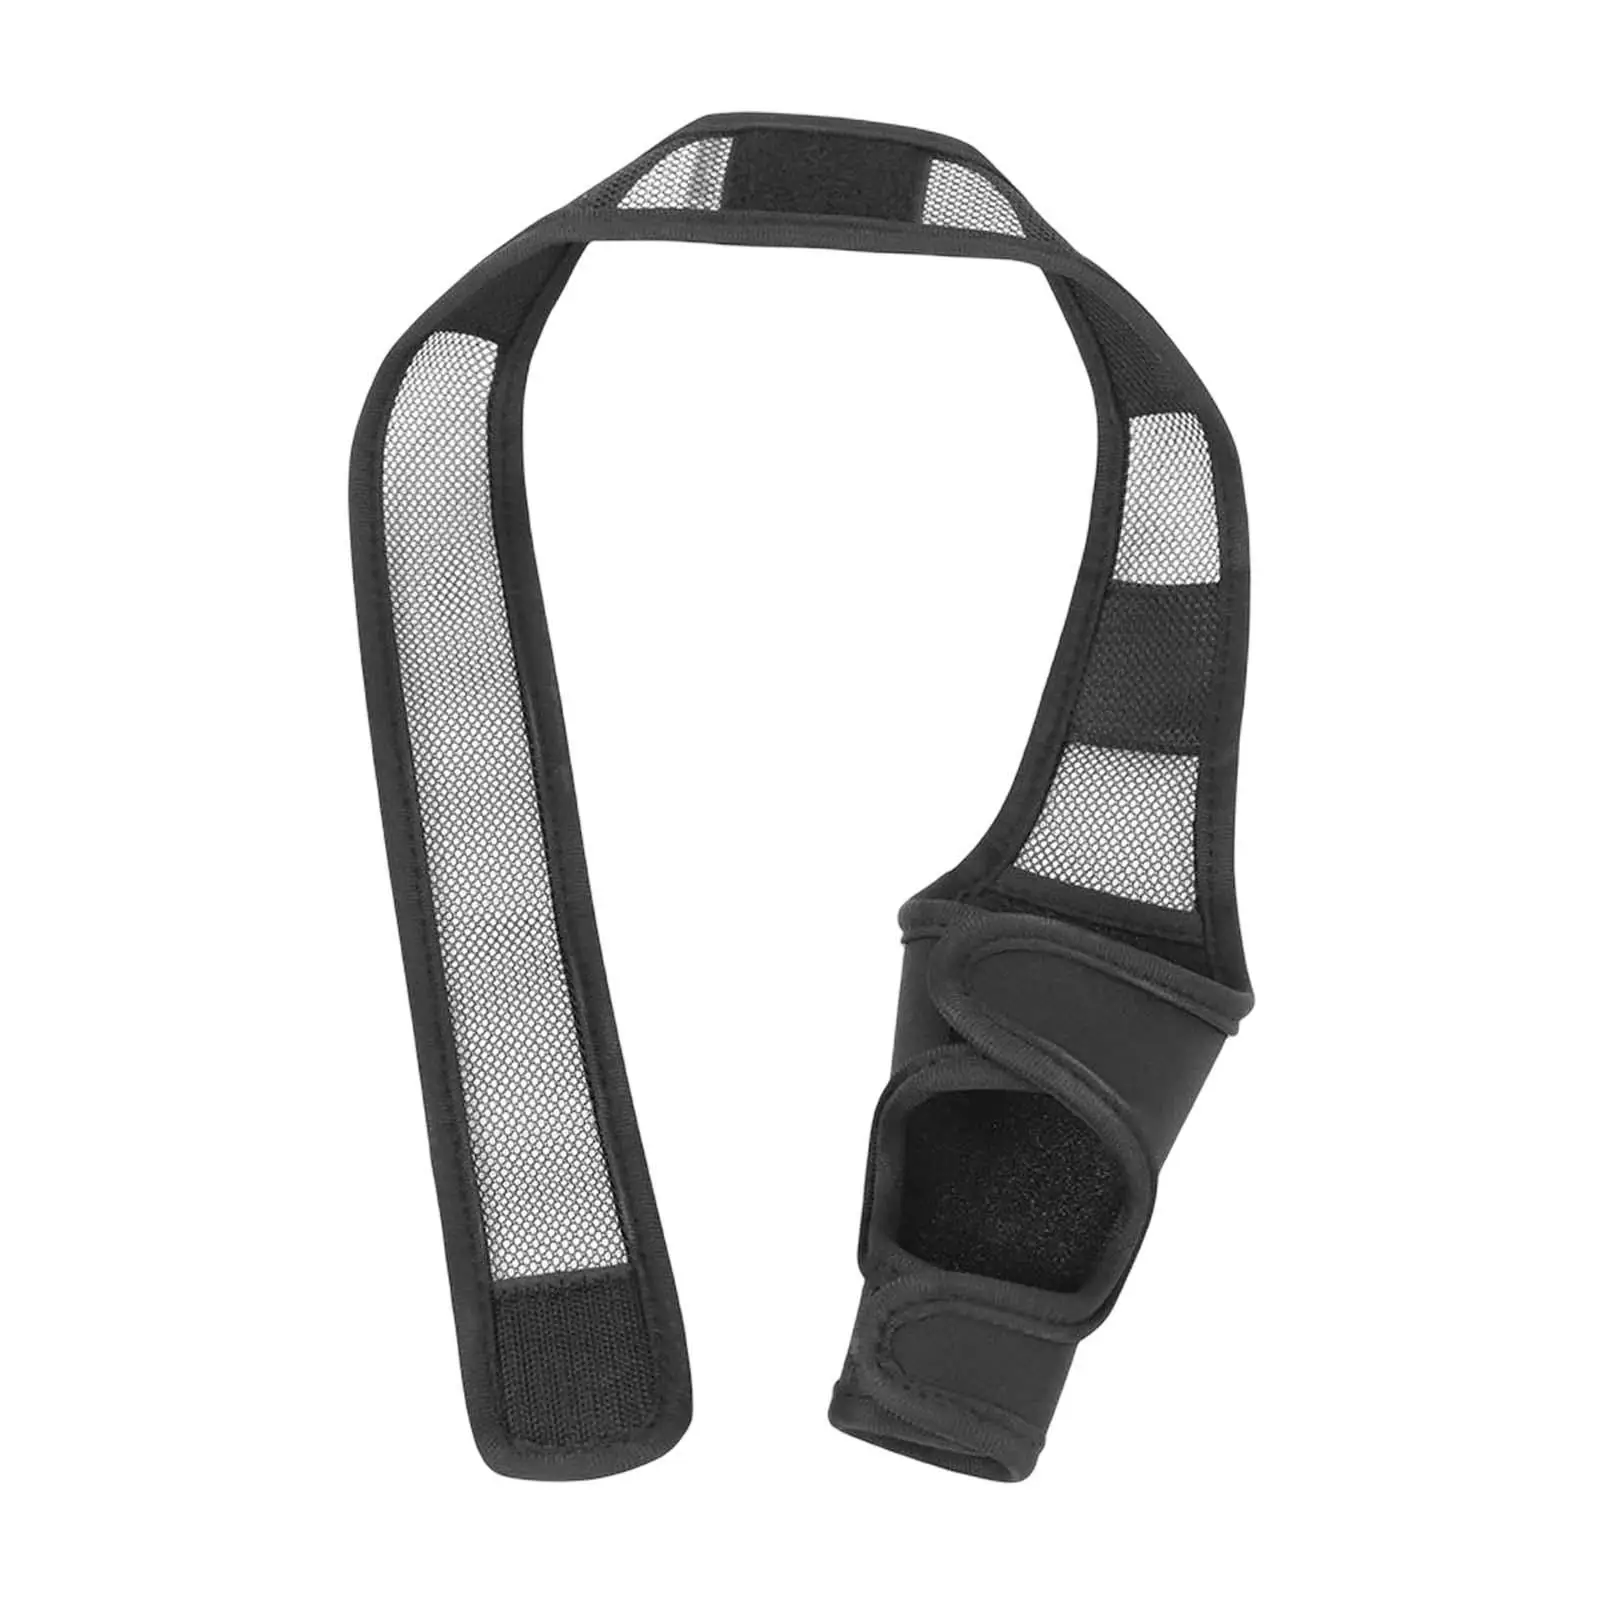 Dog Knee Brace Assist Band Auxiliary Strap Breathable Protector for Old,